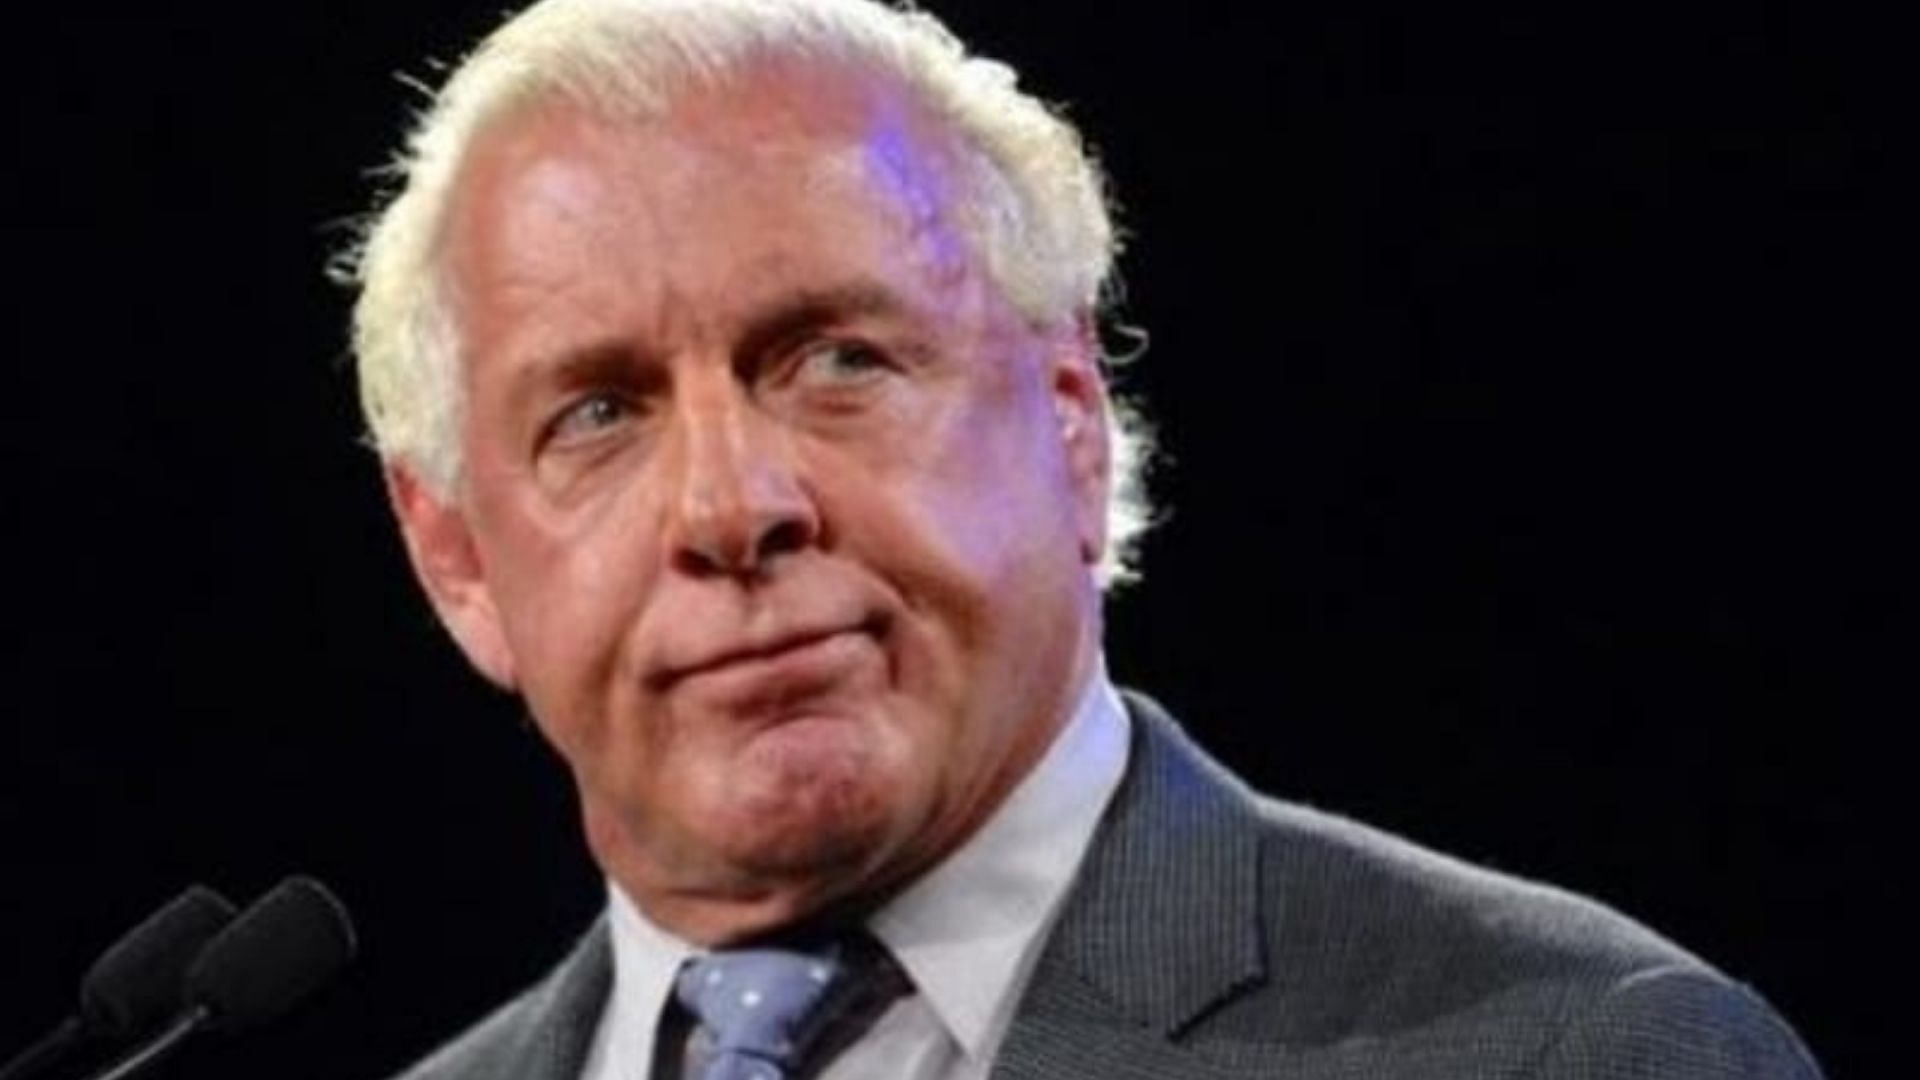 Ric Flair on the microphone at a media event